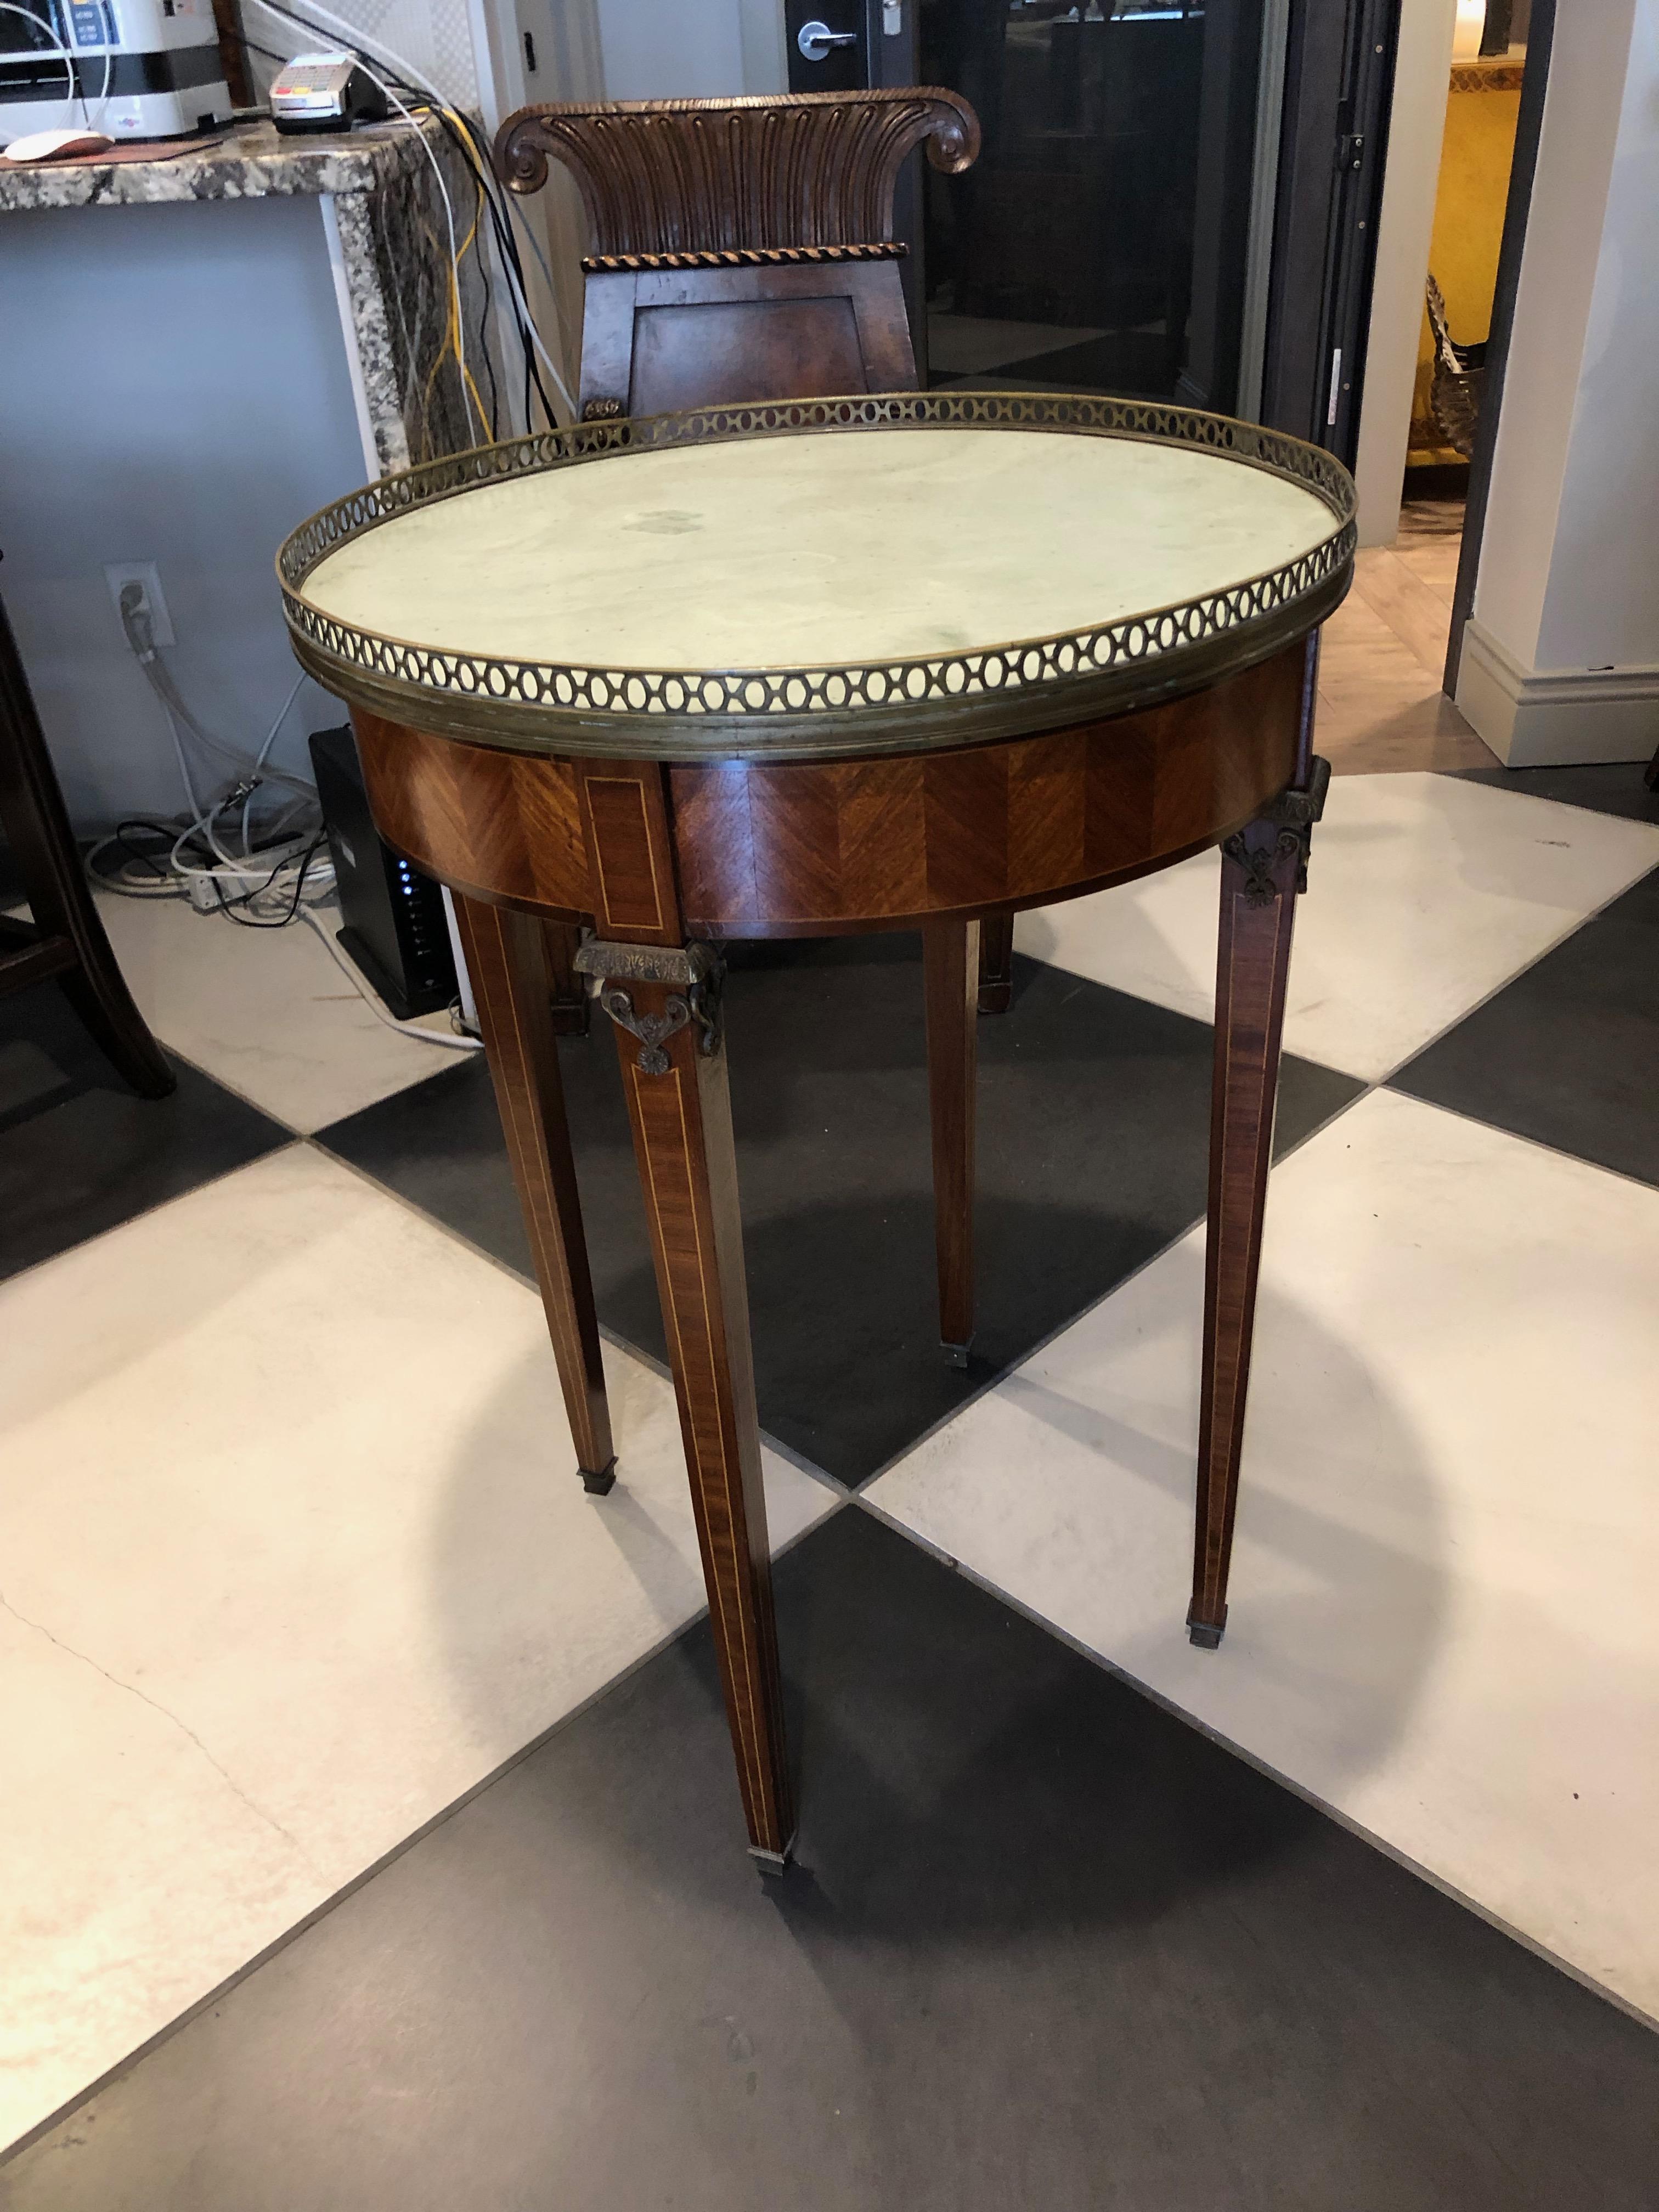 This French Bouillotte table can be used as a side table. It has light mahogany marquetry surrounding the top portion, string design to the legs and a light turquoise marble top. The bronze or brass trim is around the top, bow designs at top of legs